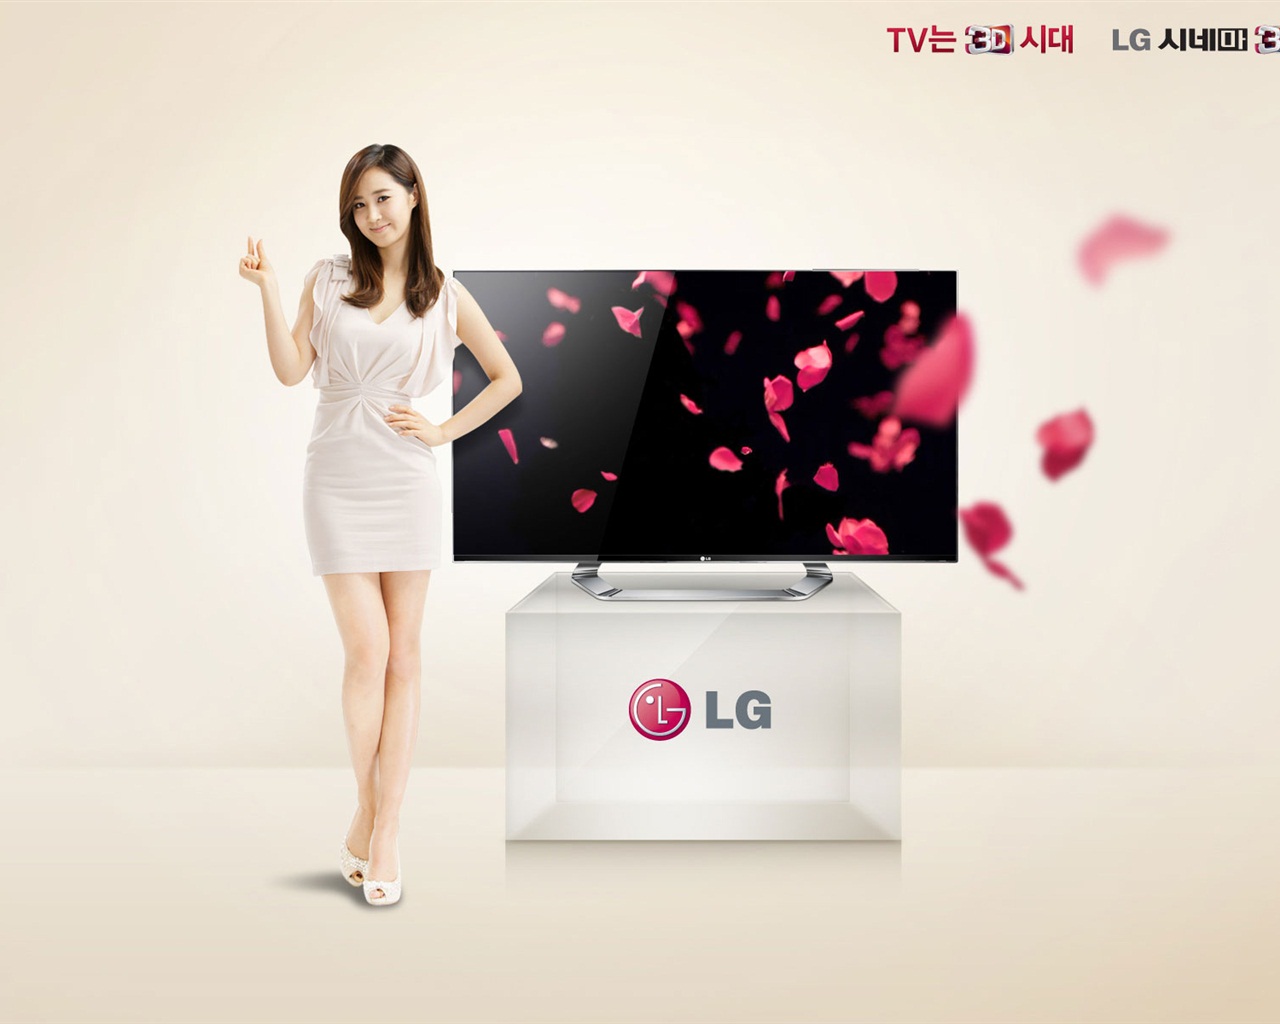 Girls Generation ACE and LG endorsements ads HD wallpapers #17 - 1280x1024